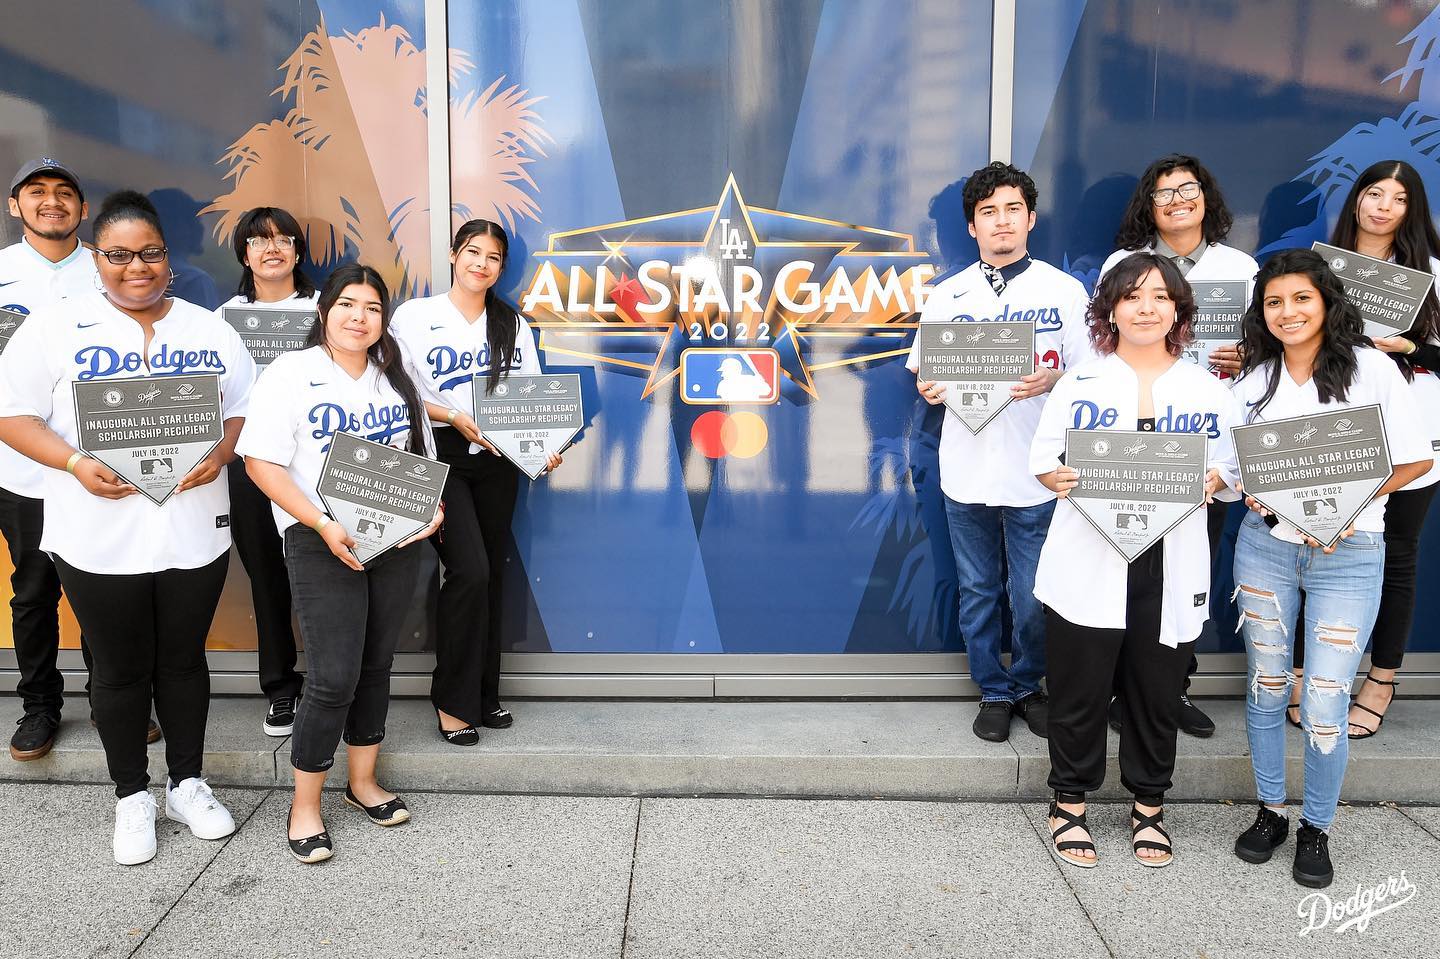 The All-Star team of MLB, the Dodgers and @dodgersfoundation is making an All-St...